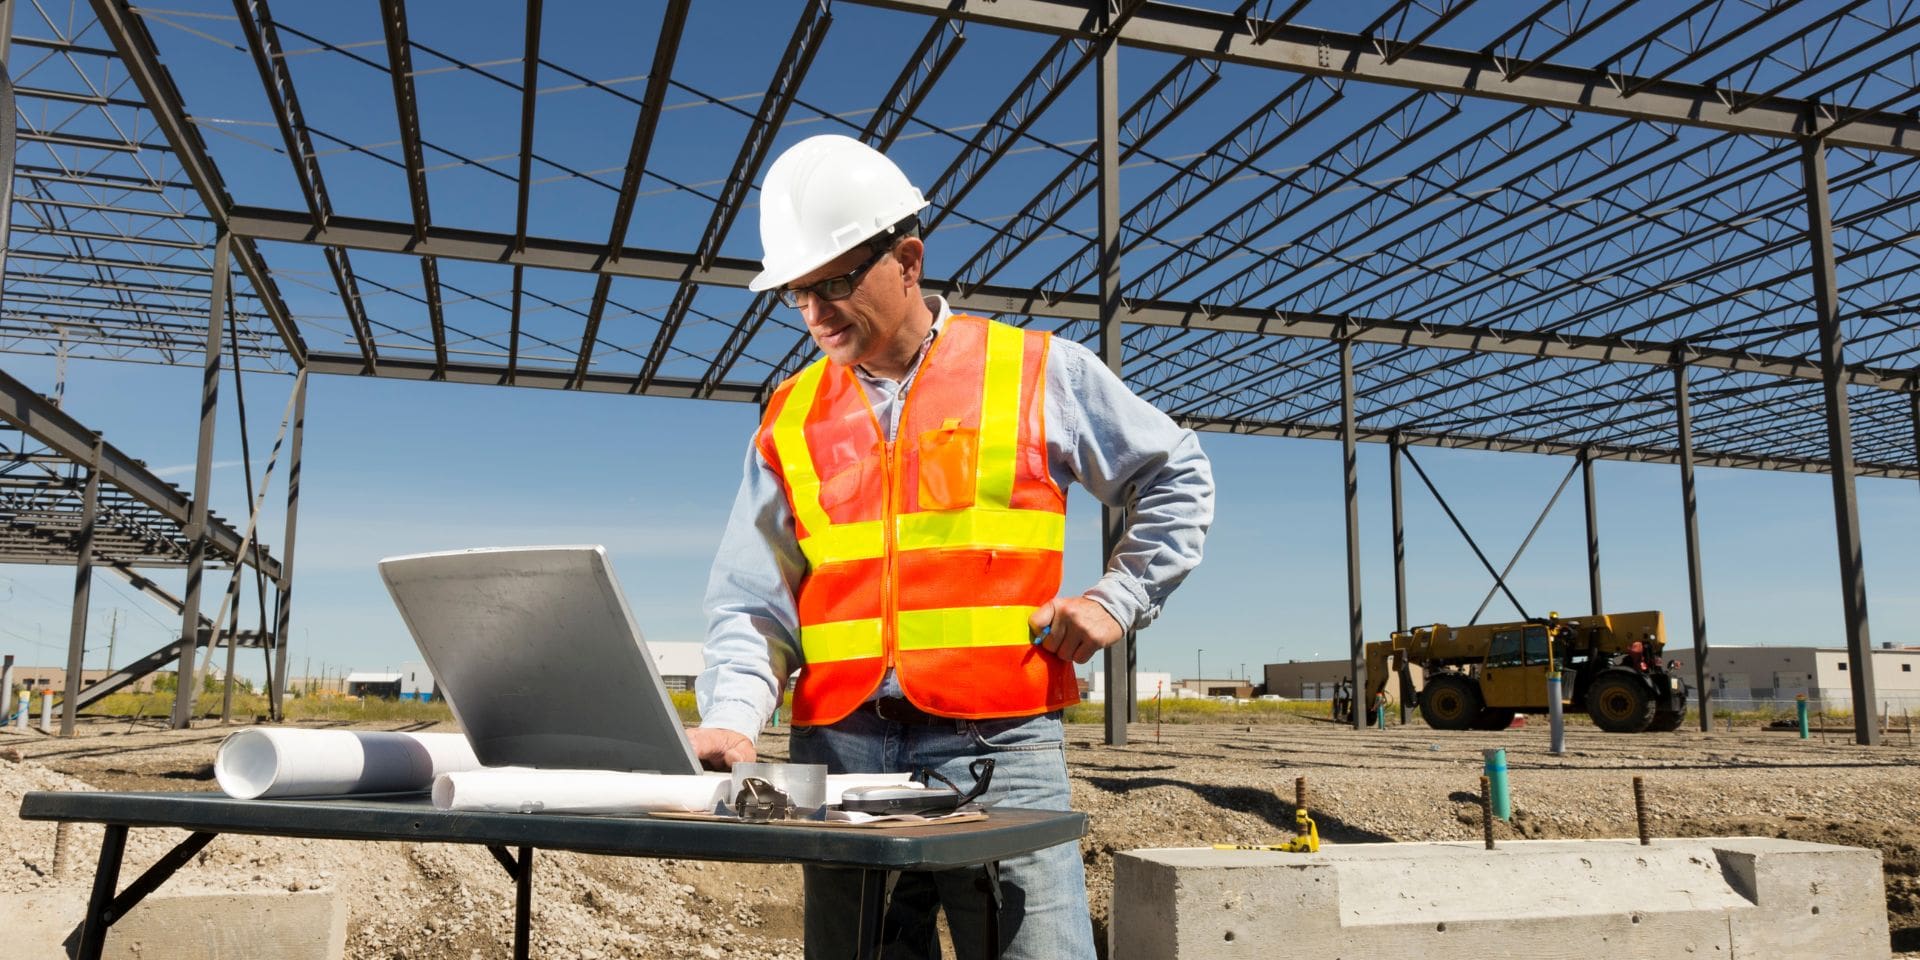 IT Support for AEC - Architecture, Engineering & Construction Industries - SkyTerra